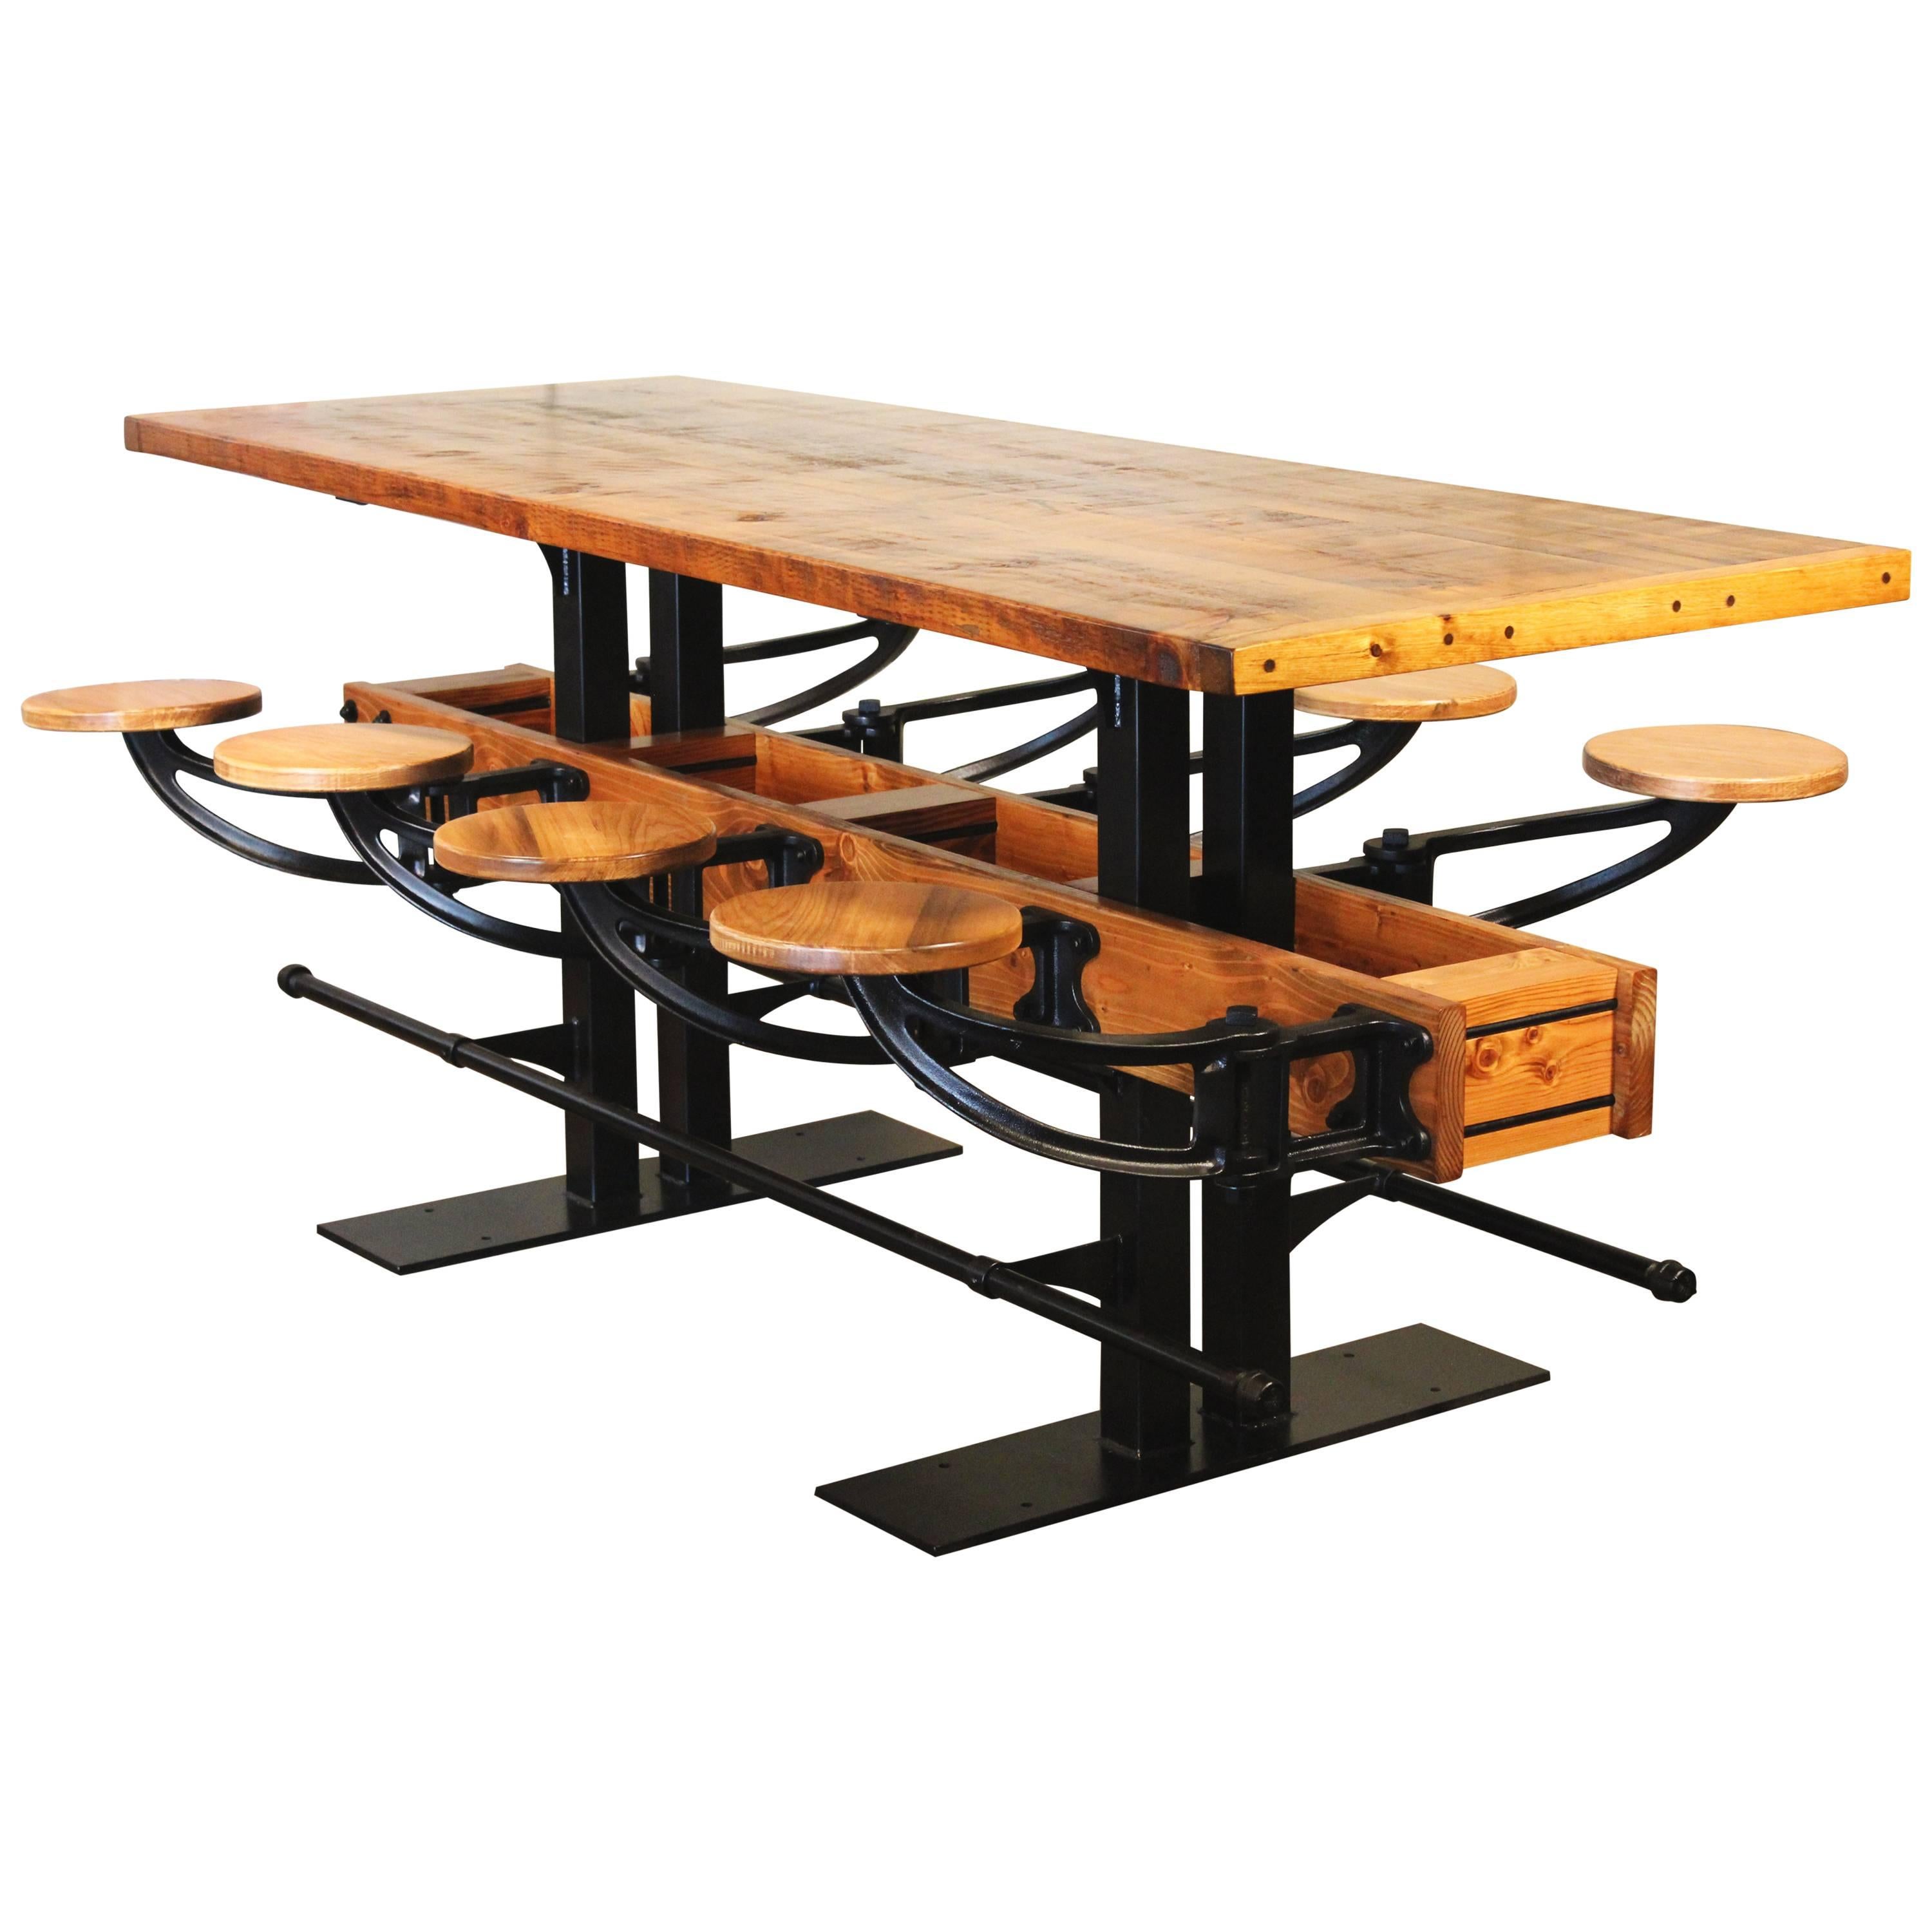 Swing out seat restaurant bar / pub height table. Featuring eight cast iron and wood swing out seats, foot rails and 2